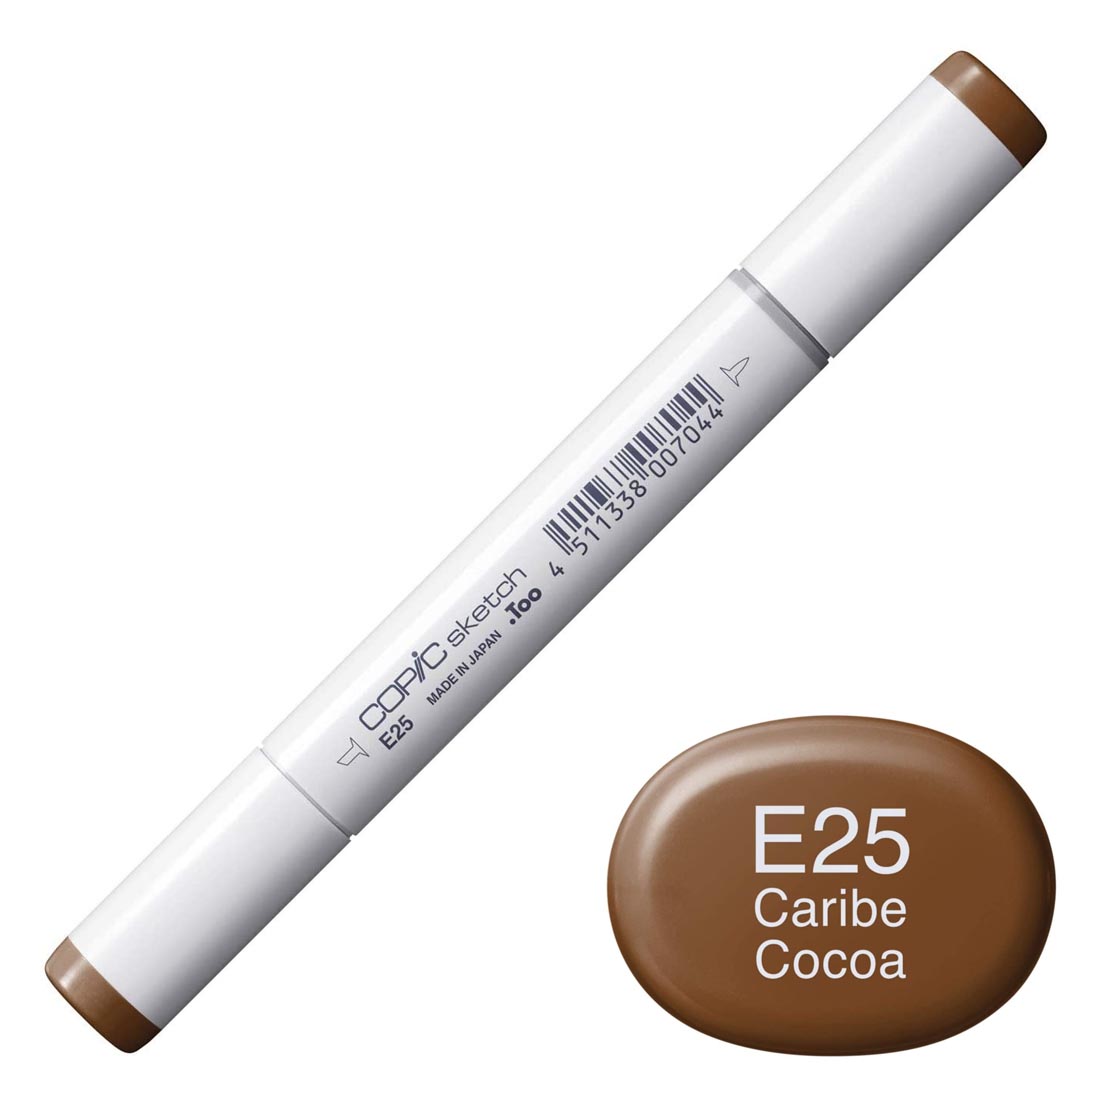 COPIC Sketch Marker with a color swatch and text of E25 Caribe Cocoa